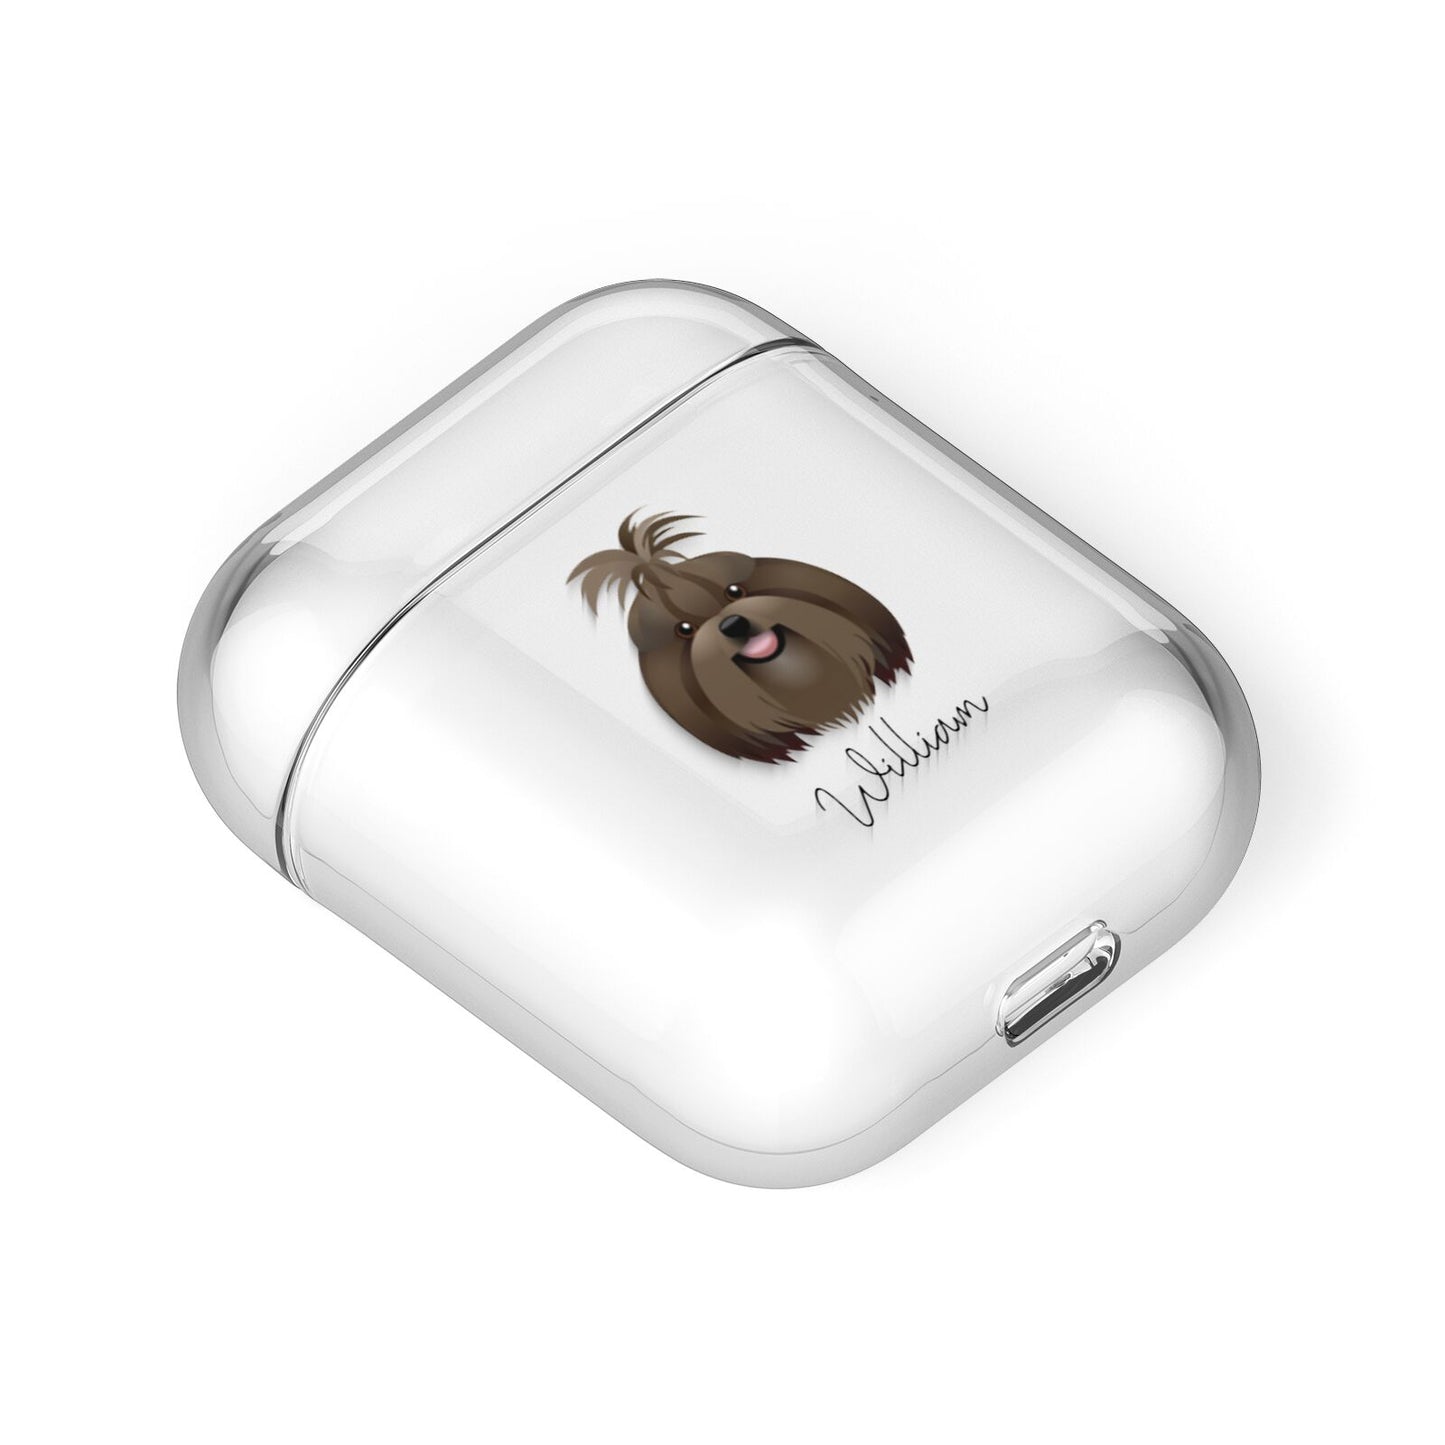 Shih Tzu Personalised AirPods Case Laid Flat